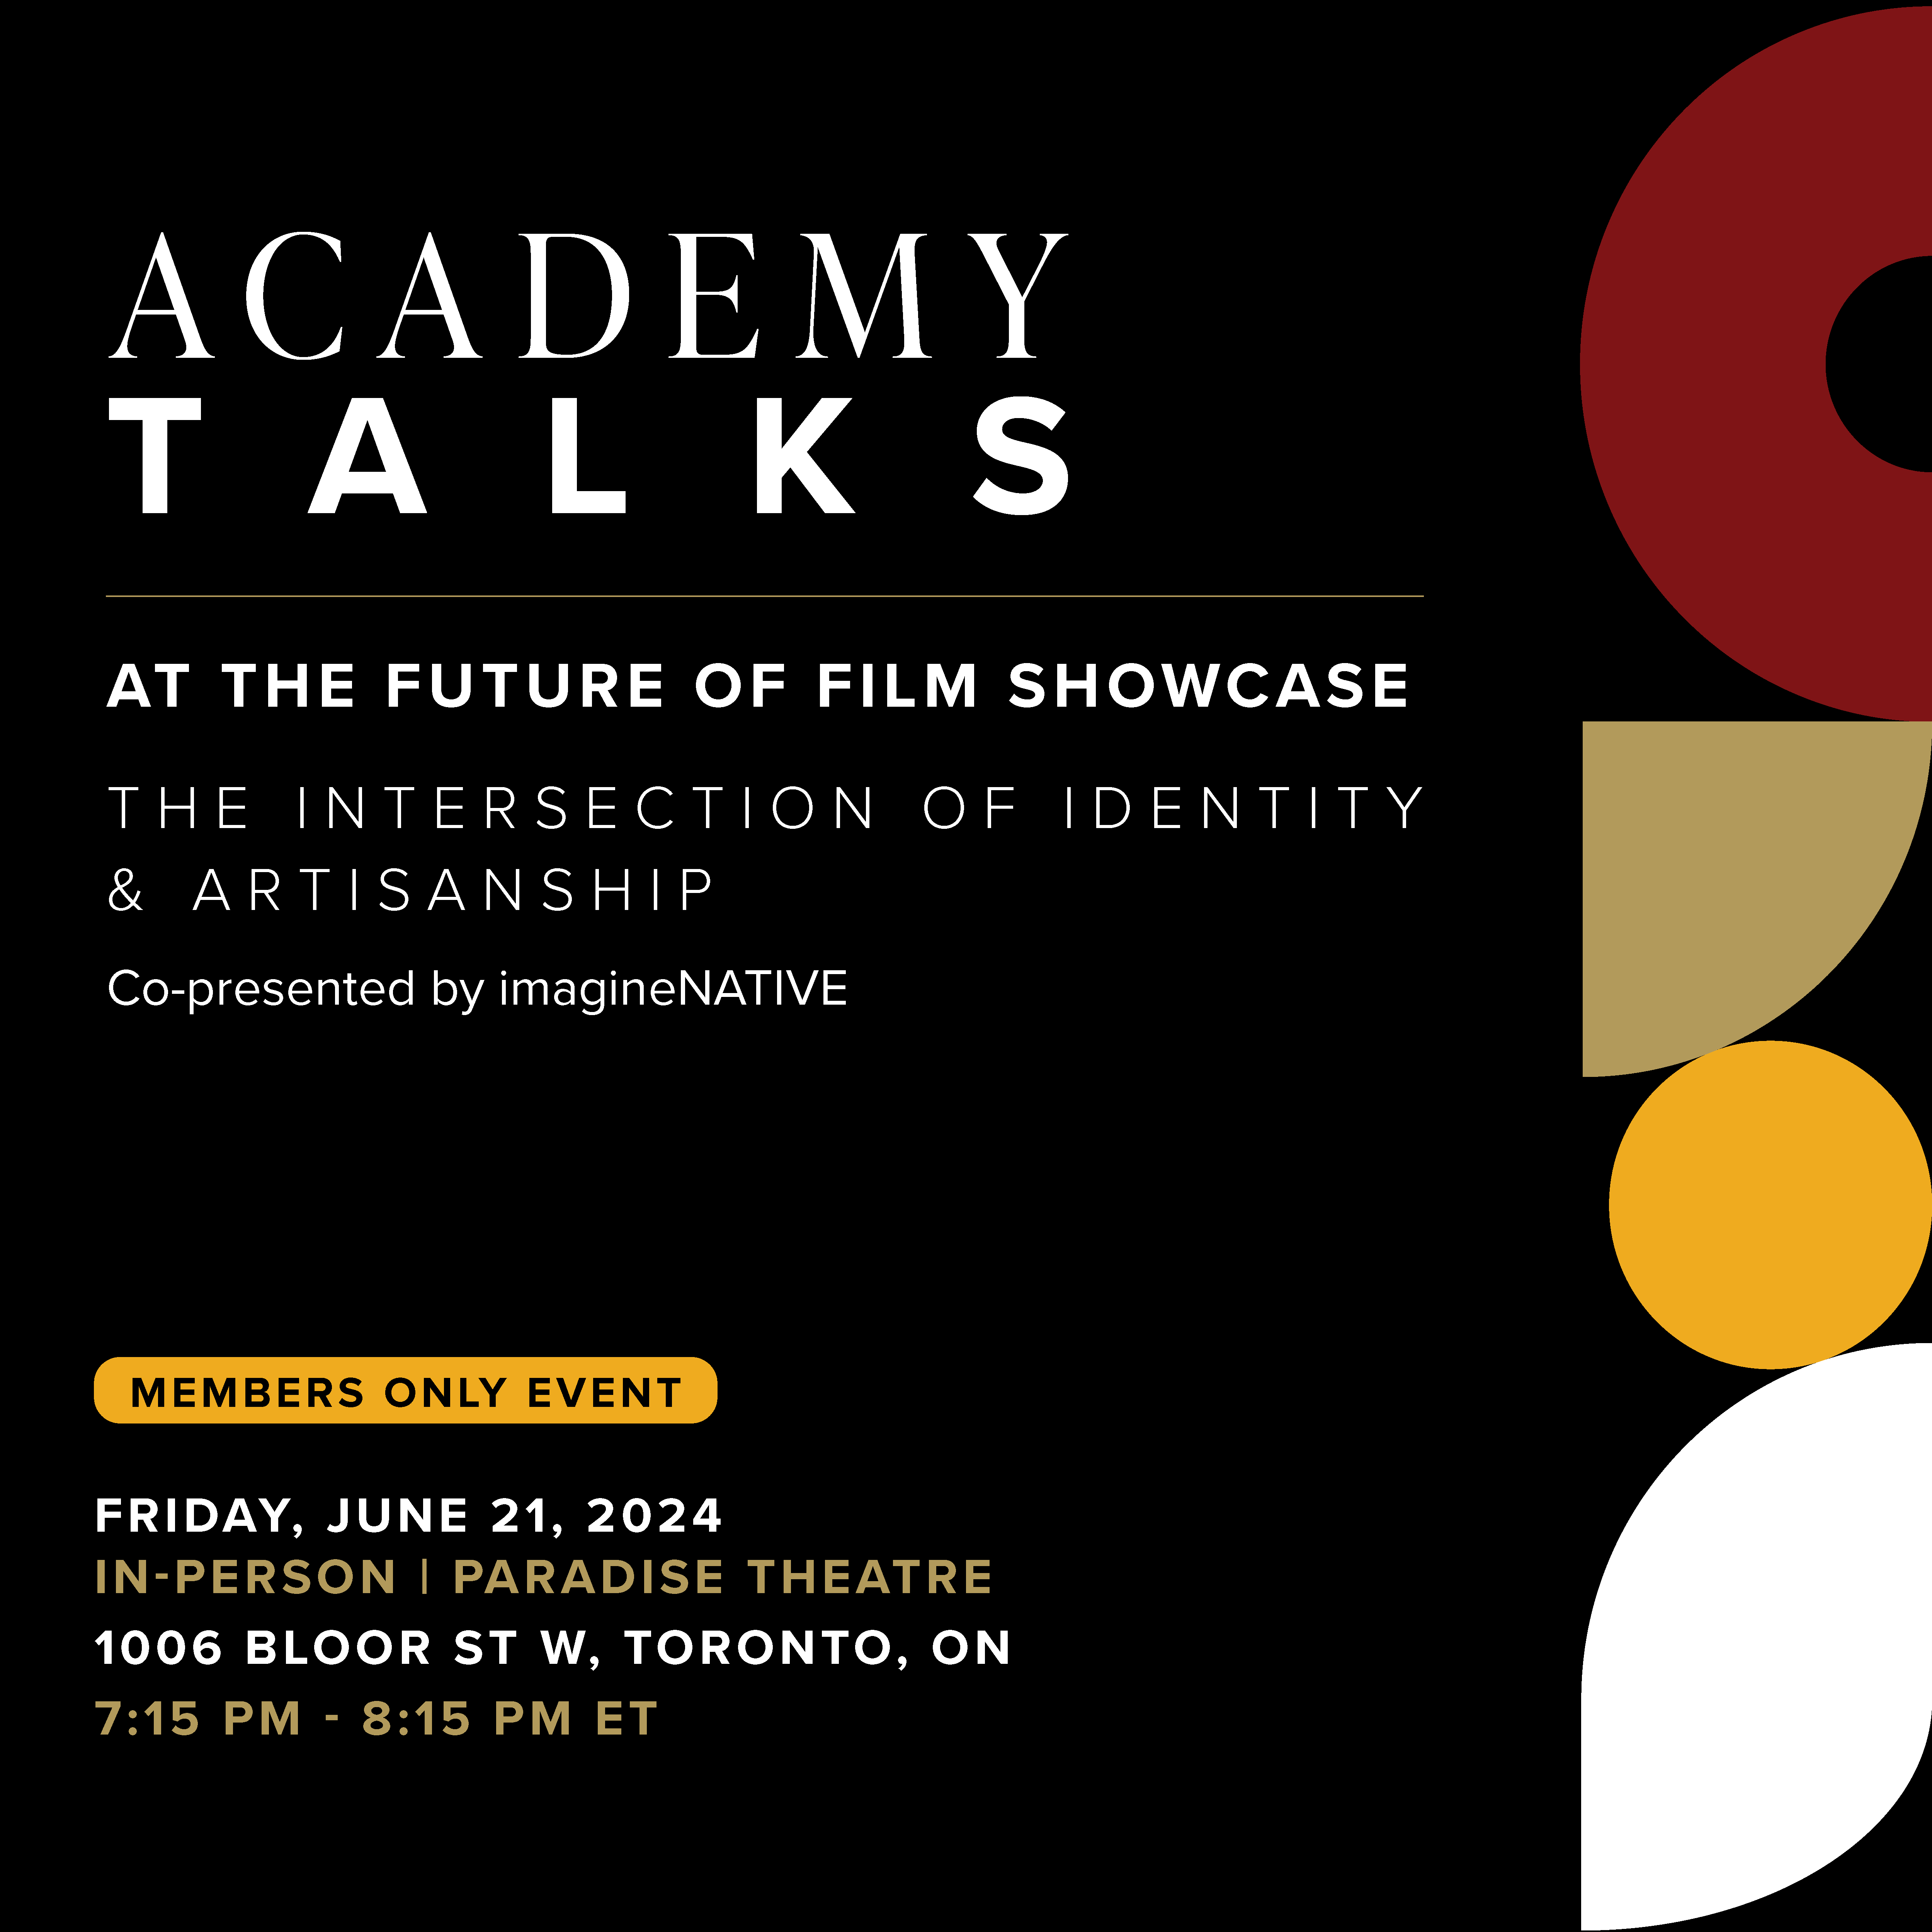 Academy Talks At the Future of Film Showcase: The Intersection of Identity & Artisanship